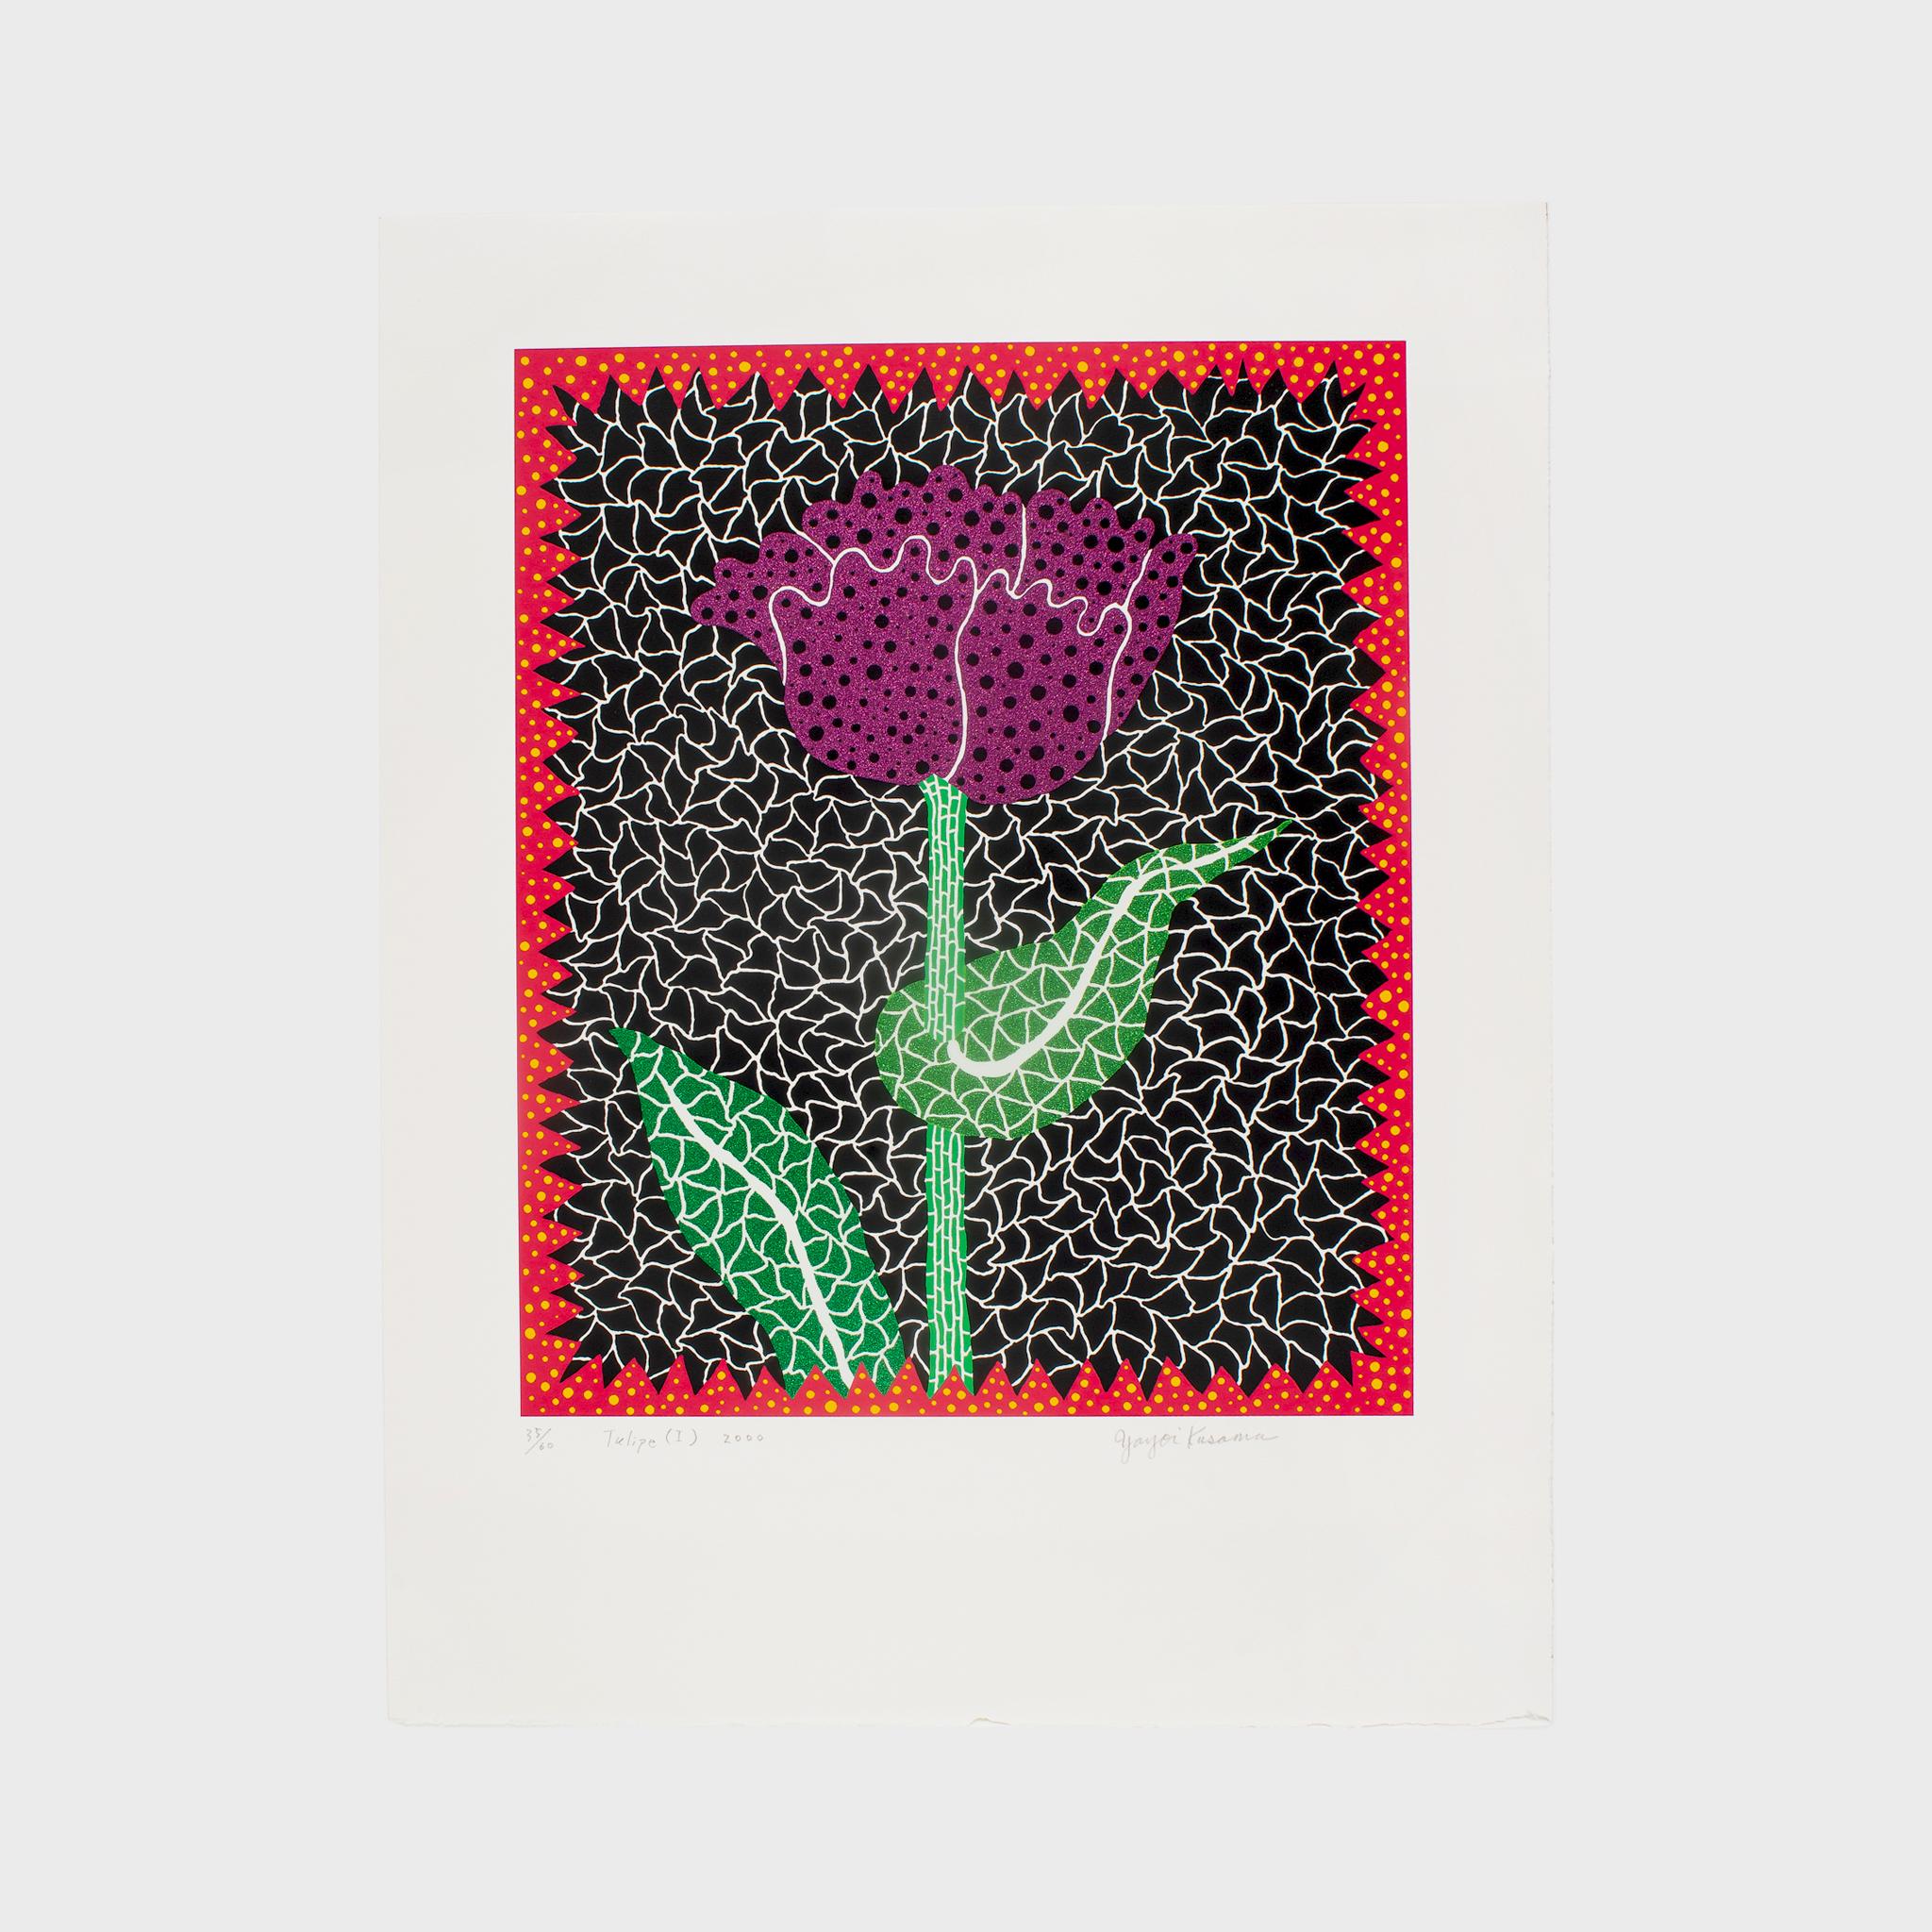 Yayoi Kusama Still-Life Print - Tulipe (1) from “Amour pour Toujours”, Limited Edition Signed Screenprint